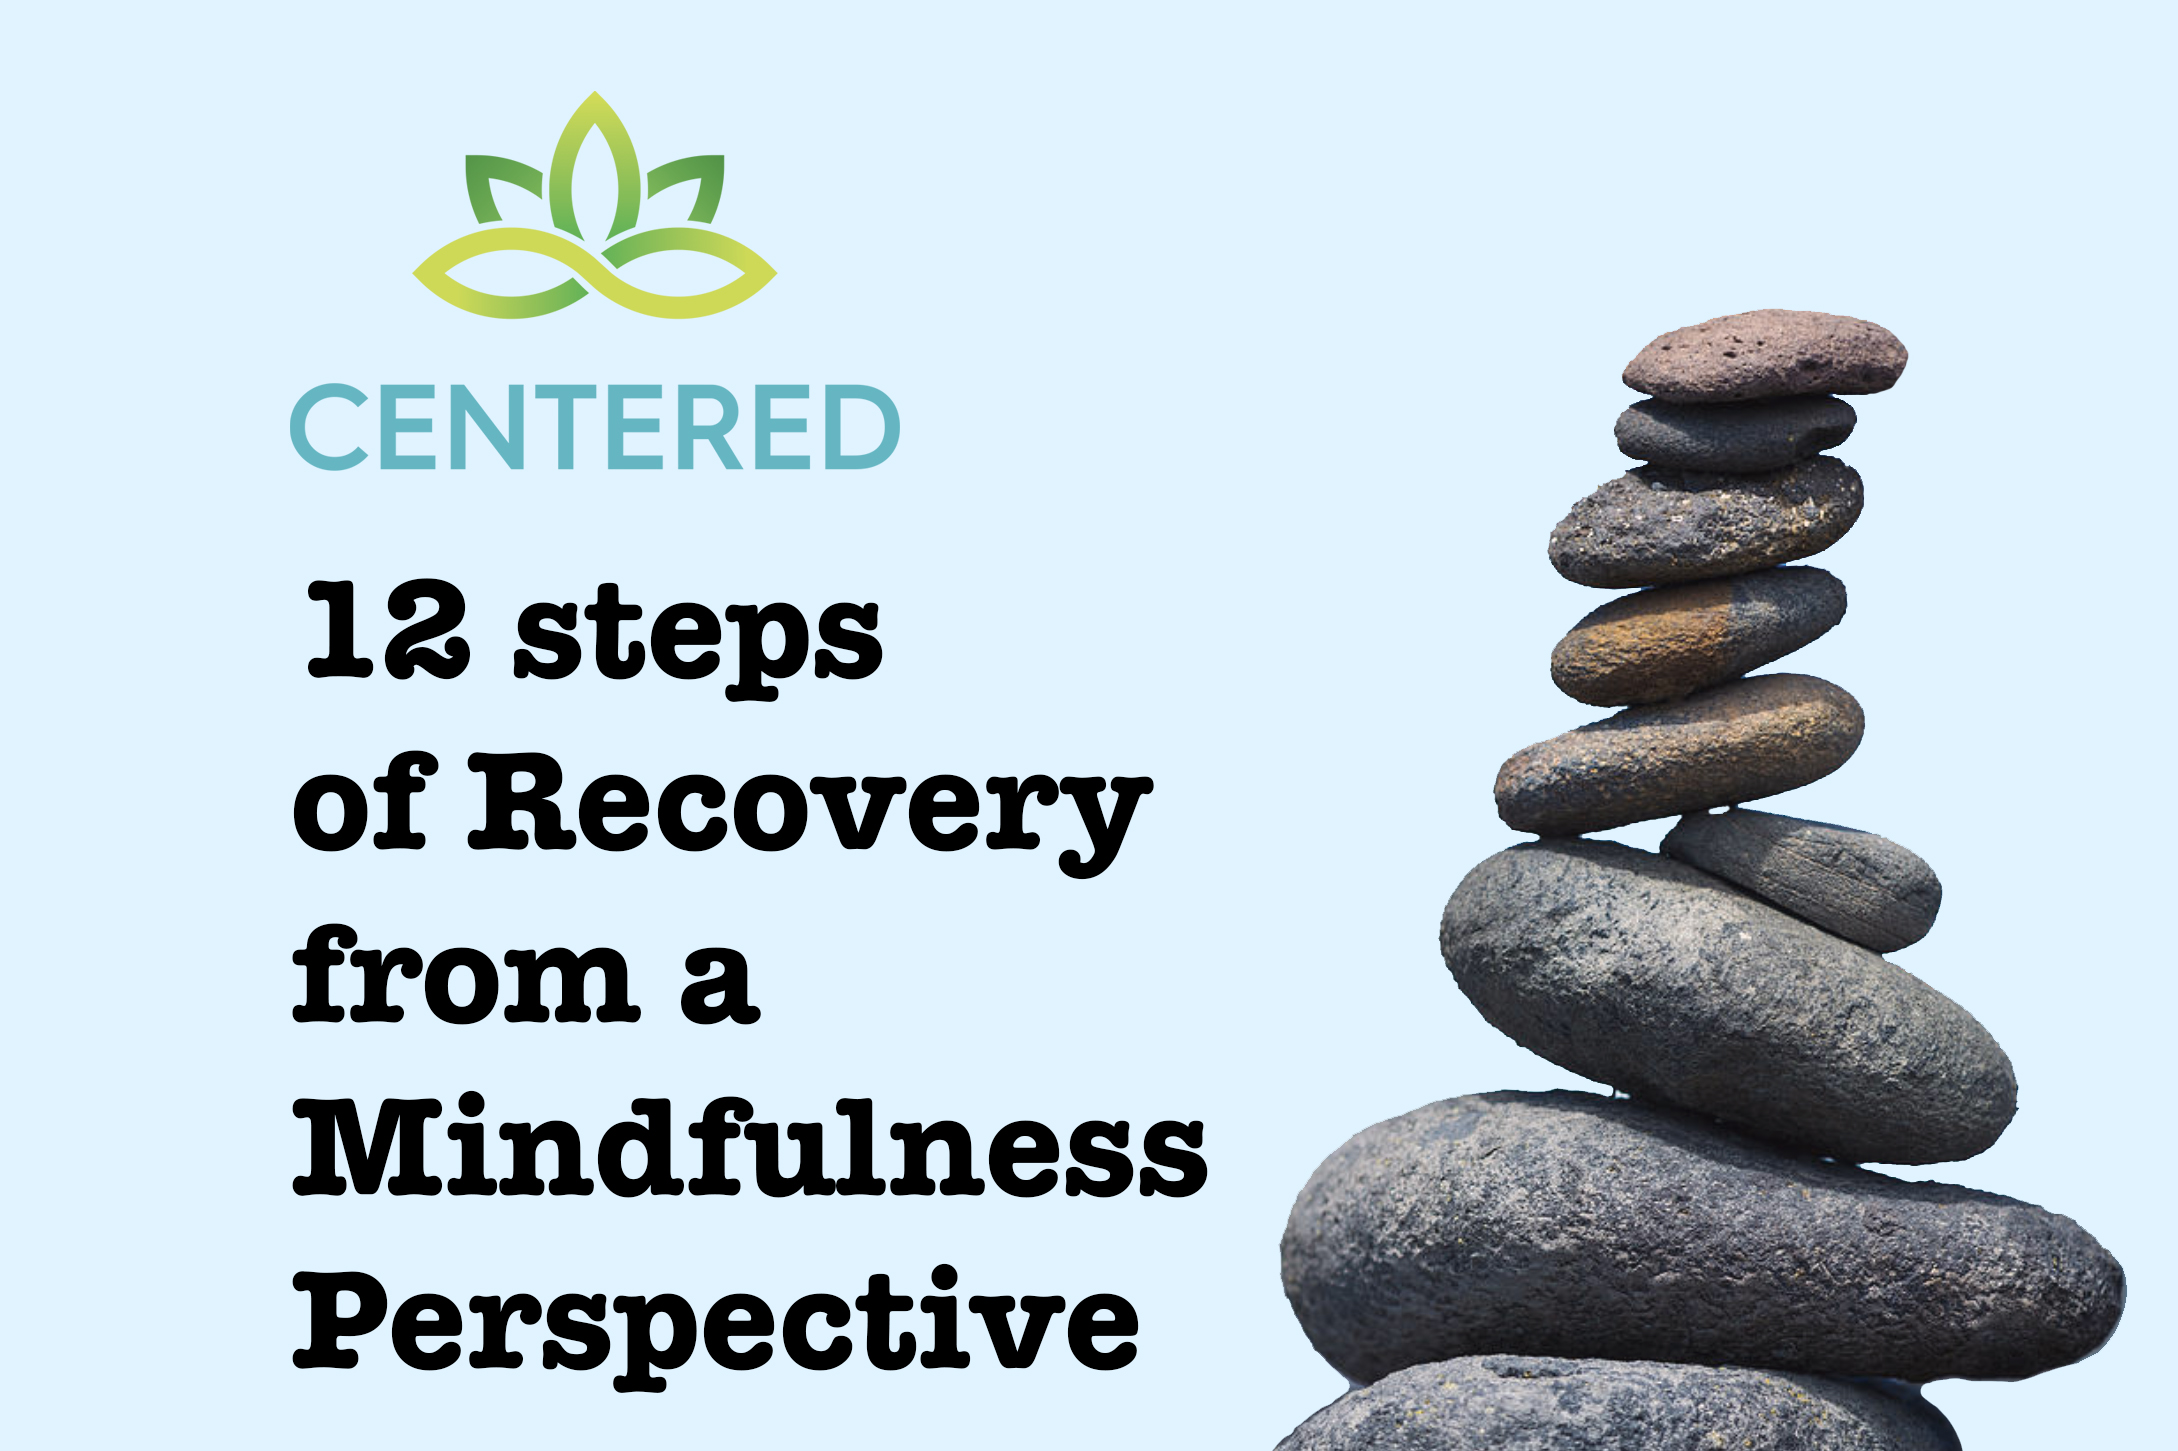 12 Steps of a Mindful Recovery